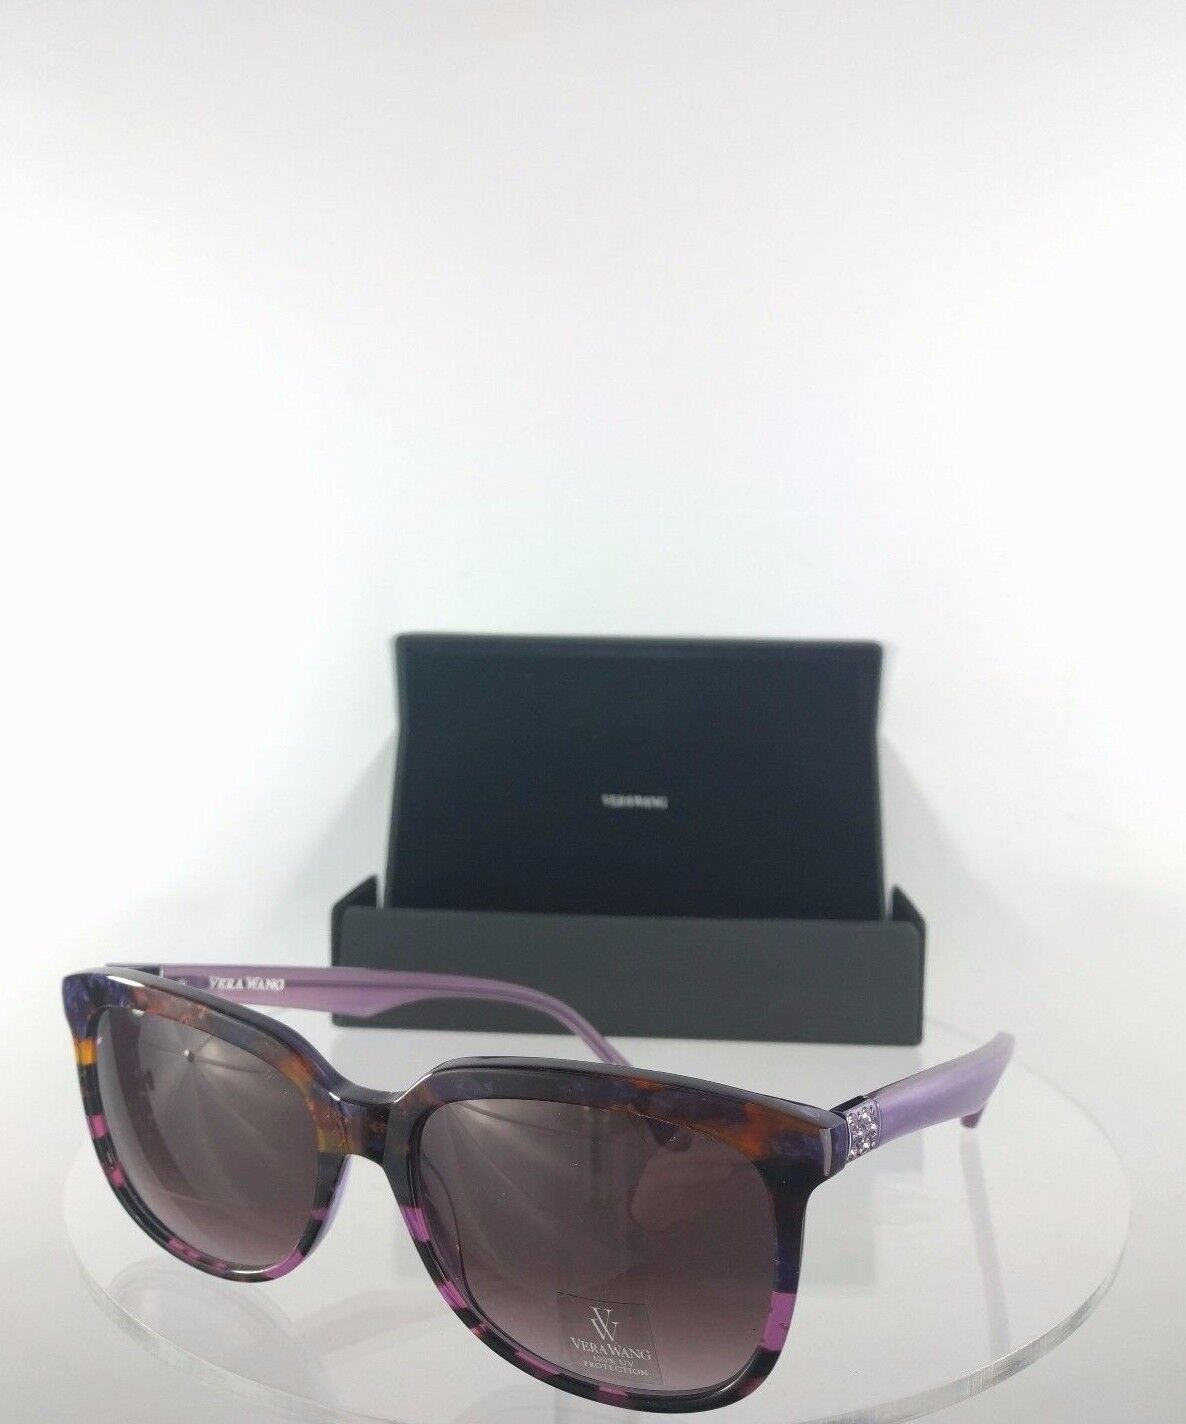 Brand New Authentic Vera Wang Sunglasses V426 WI Diamond Purple Marble Blended